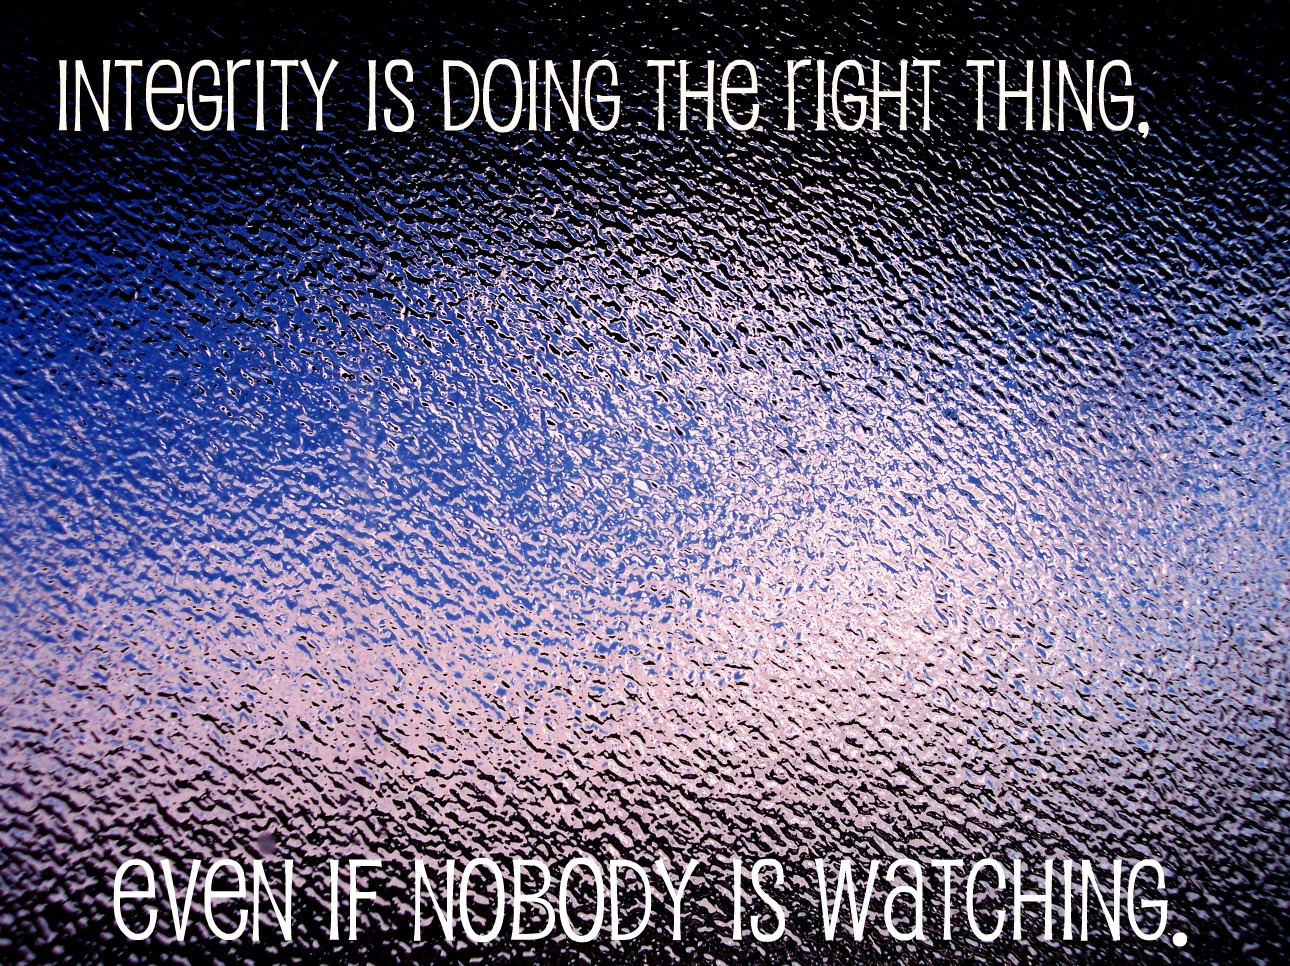 Integrity quote #3